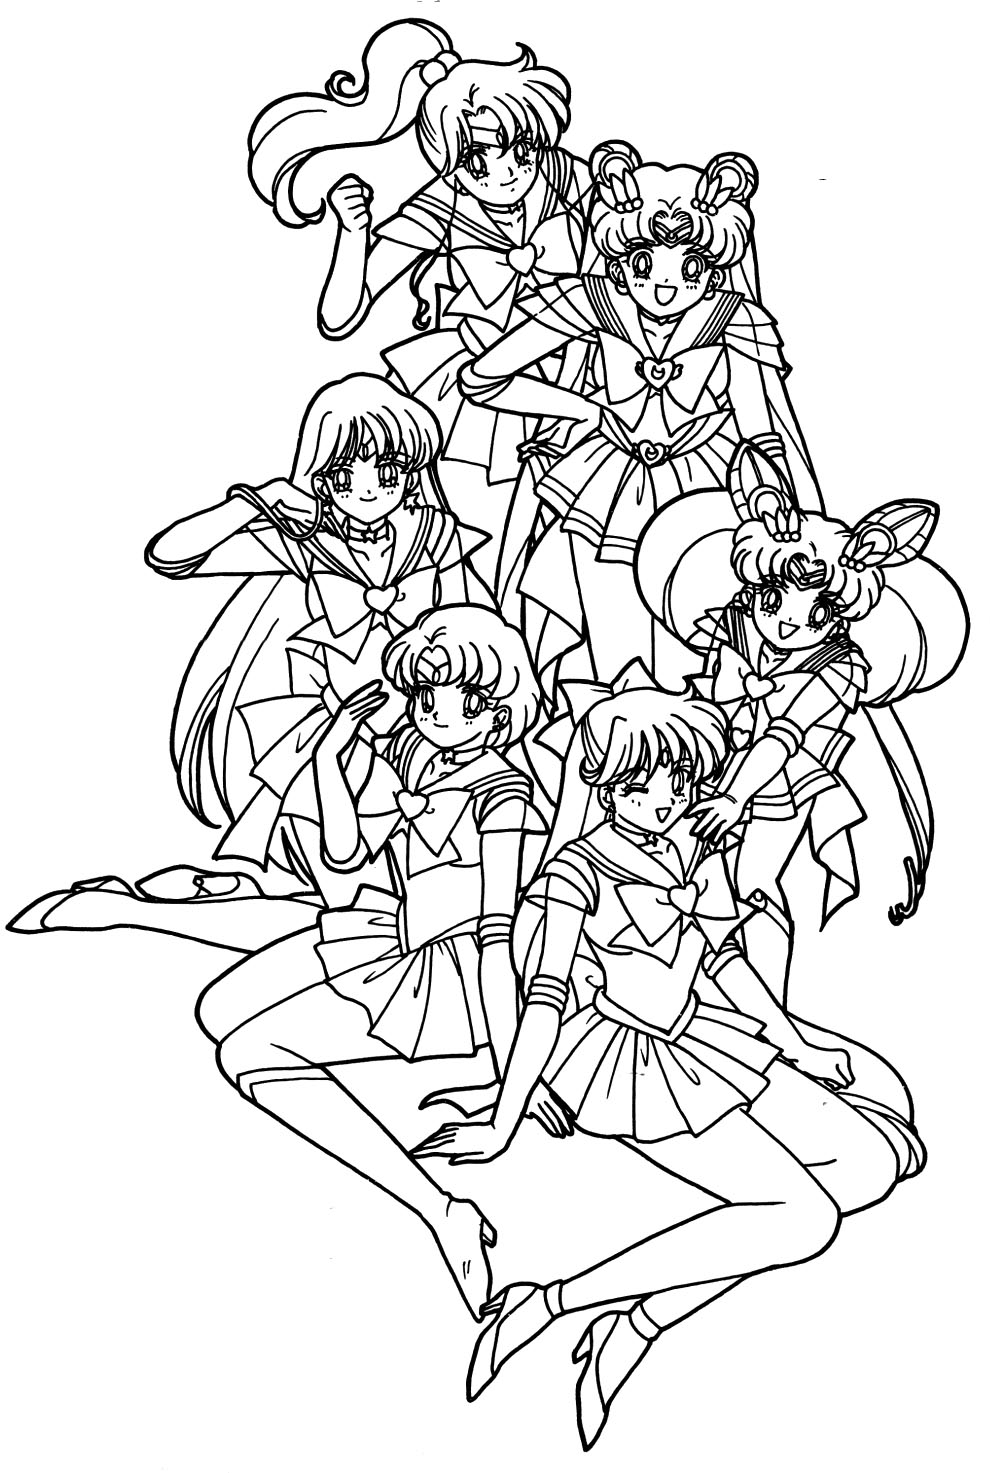 Sailor Moon Group Coloring Pages at GetColorings.com | Free printable ...